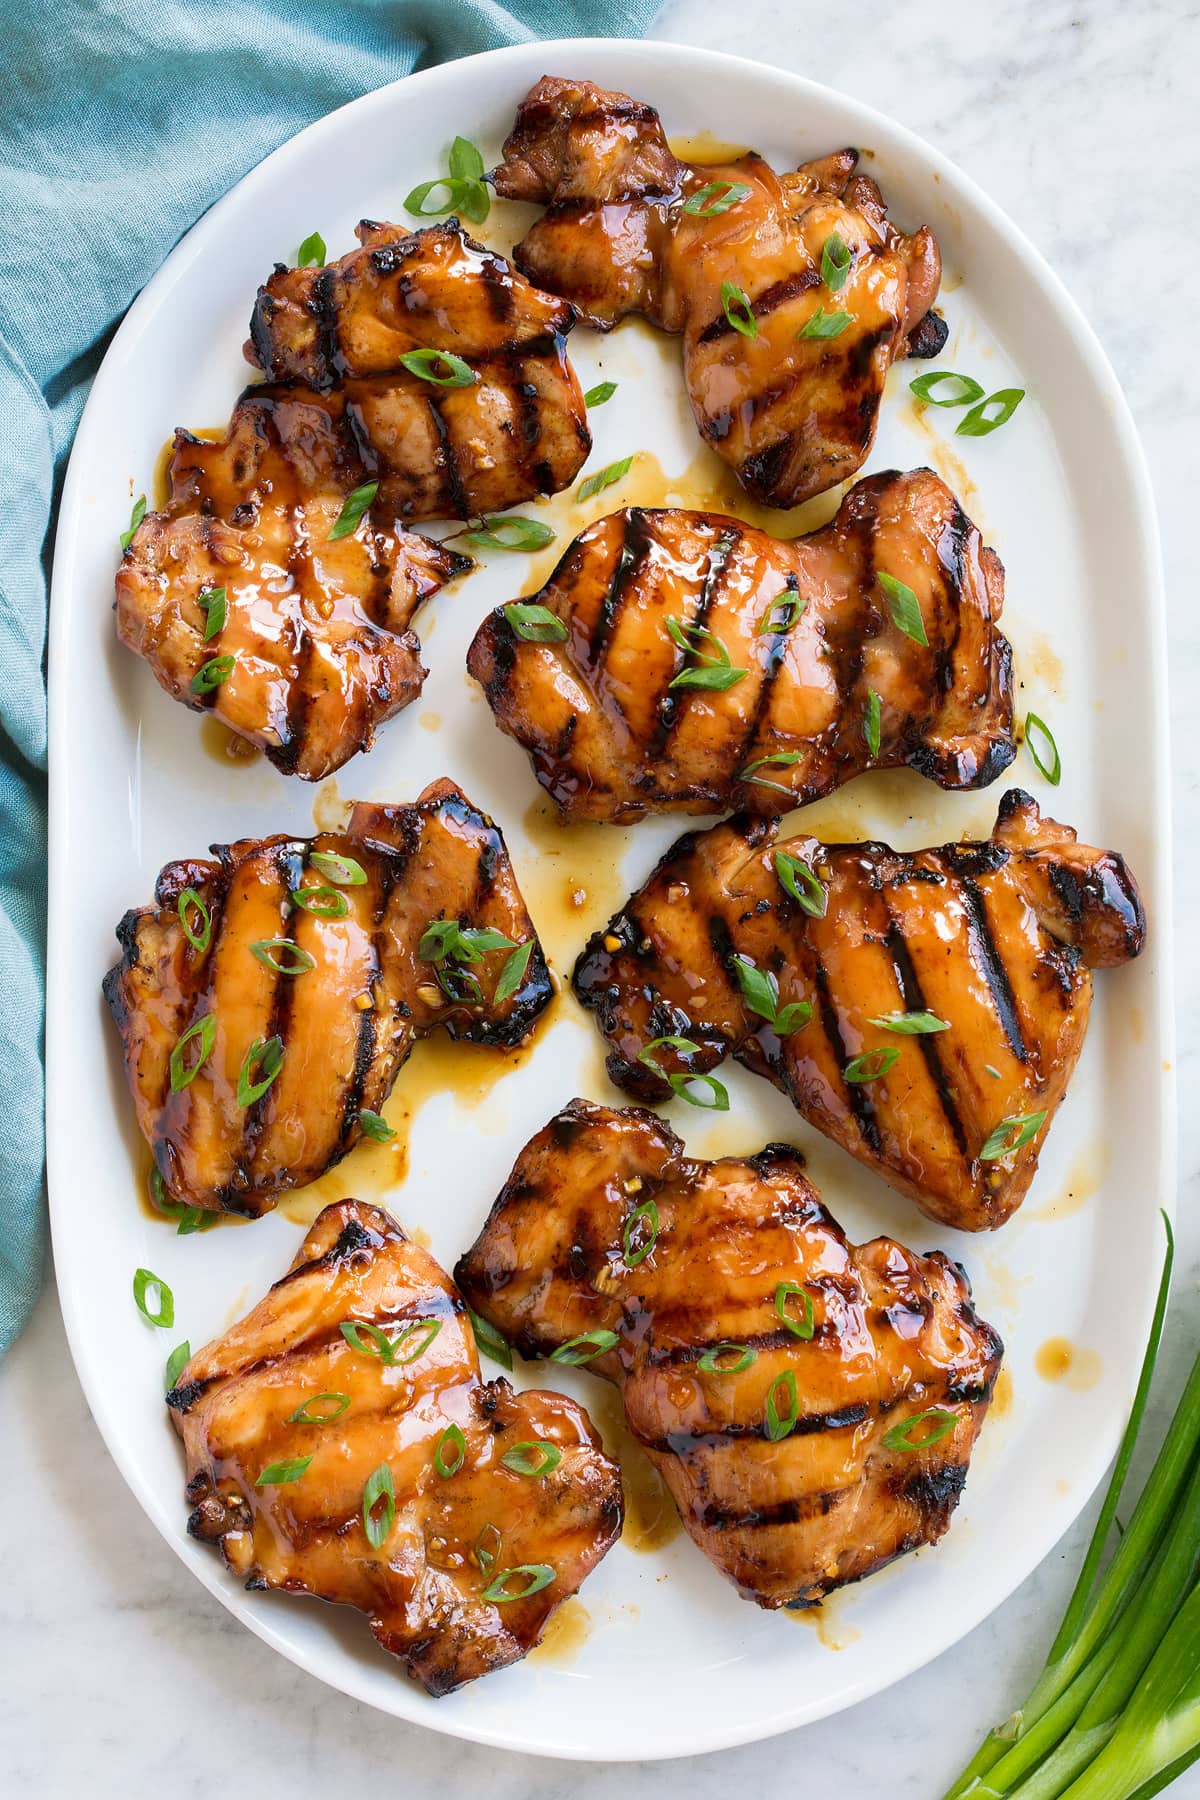 Marinated and grilled teriyaki chicken pieces on a white serving platter, shown overhead.